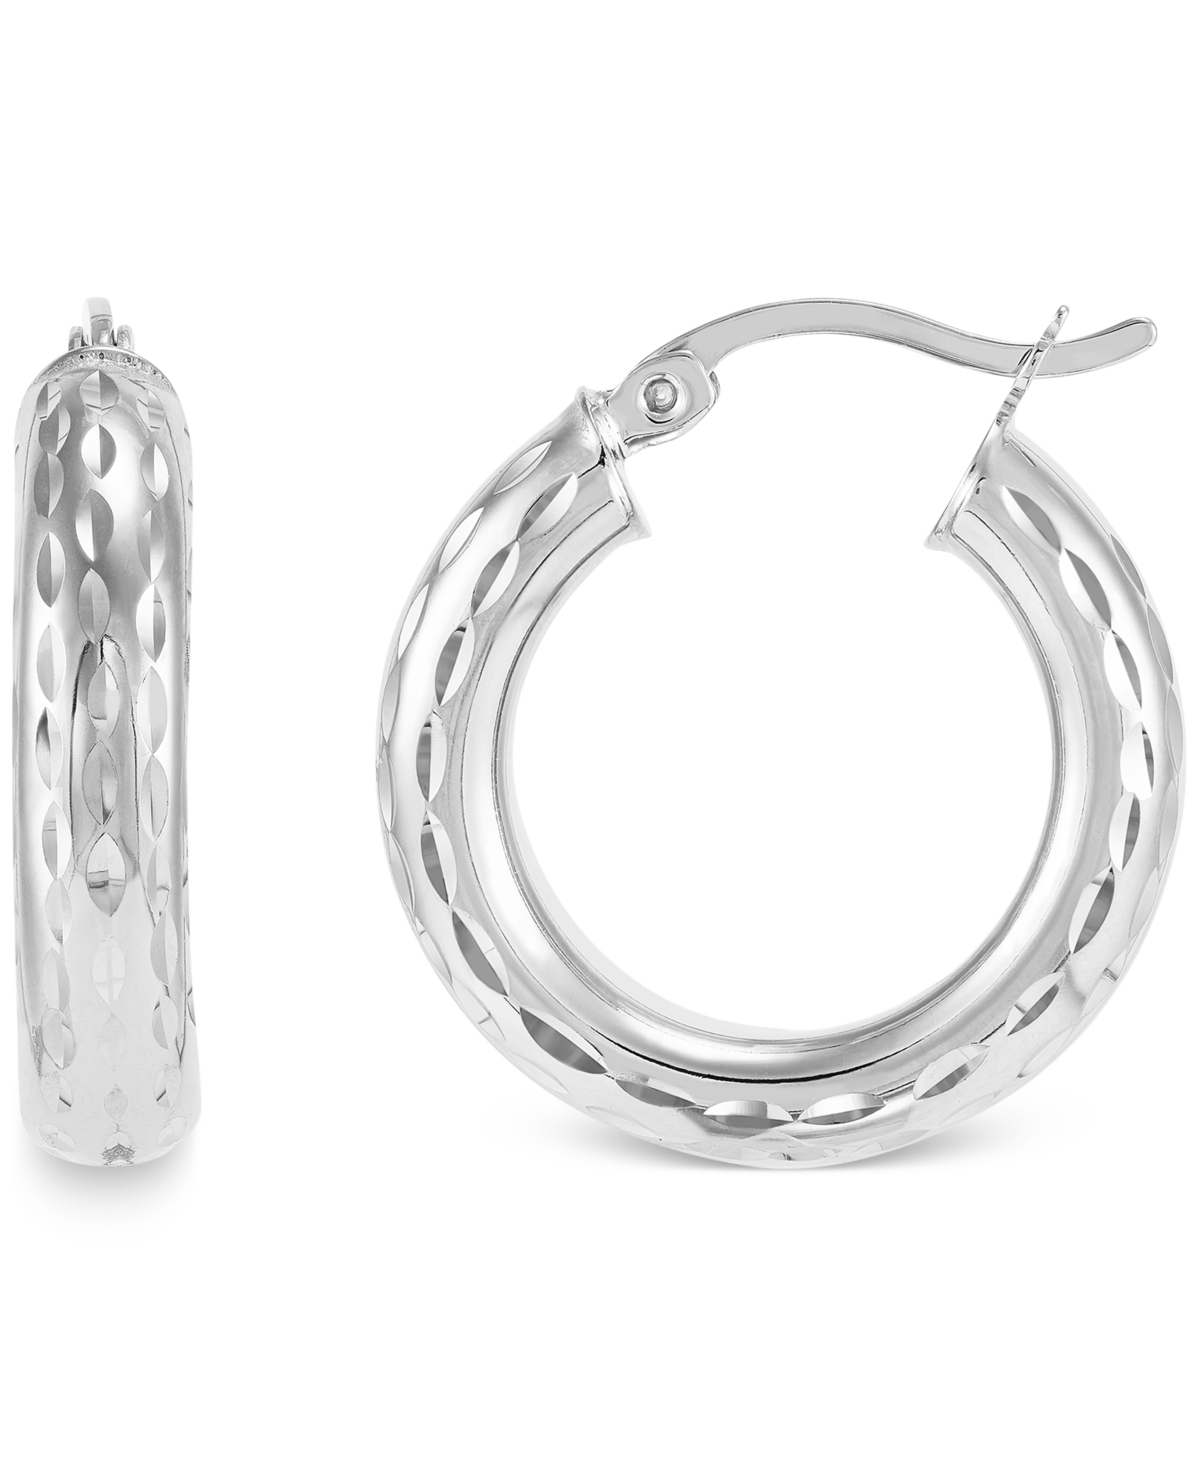 Textured Tube Small Hoop Earrings, 20mm, Created for Macy's - Gold Over Silver